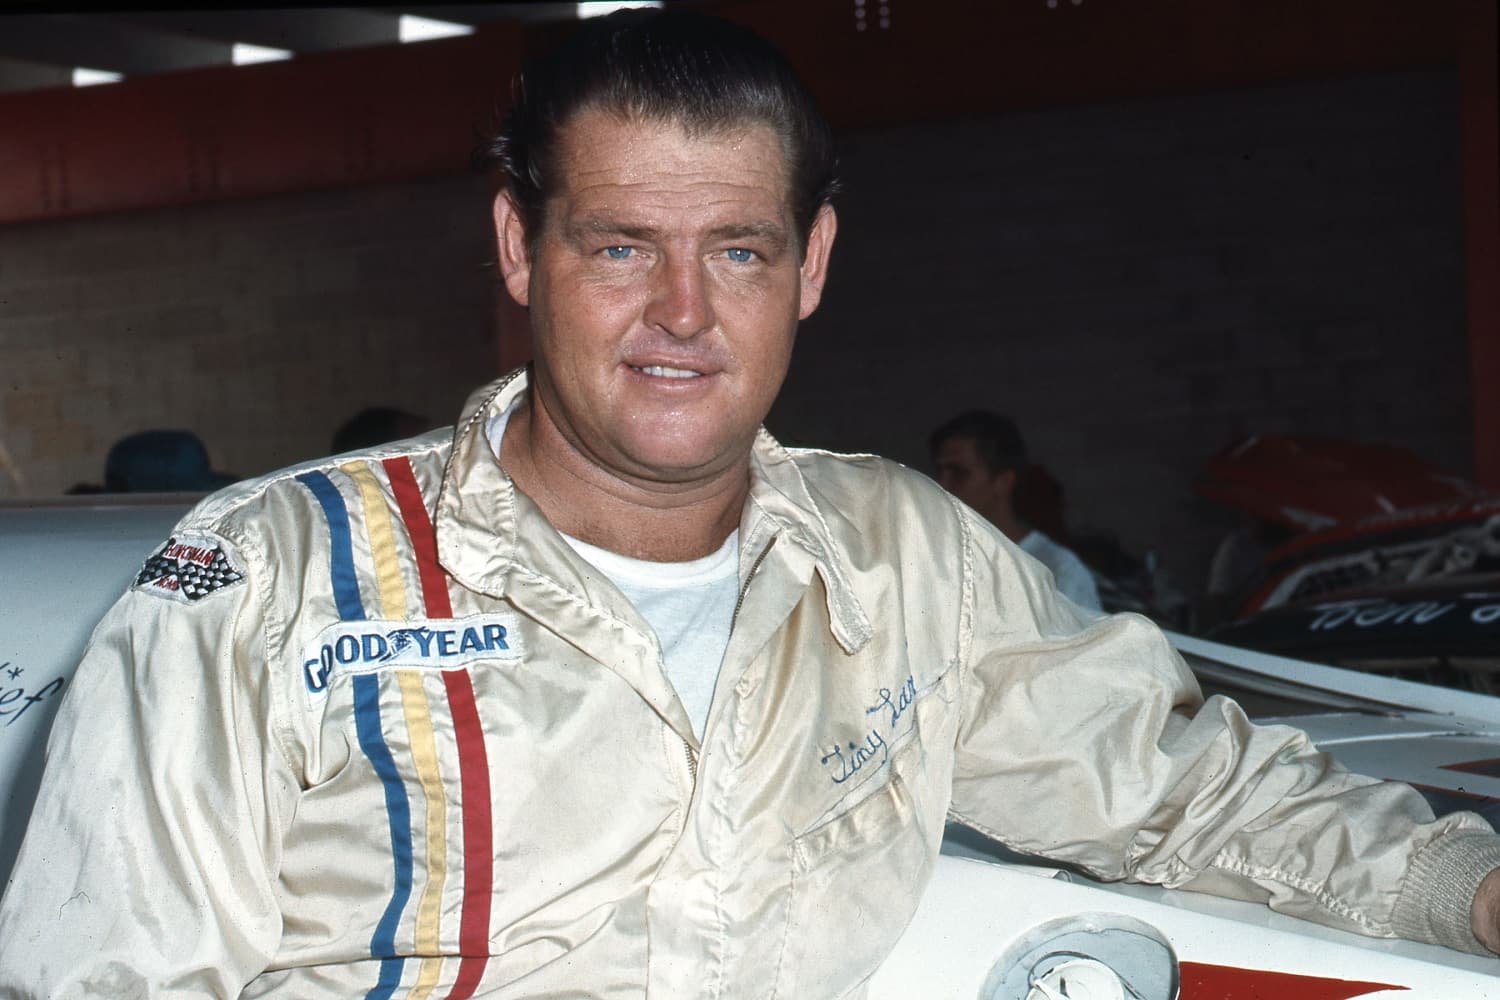 Tiny Lund poses during the 1971 NASCAR season. | ISC Images & Archives via Getty Images